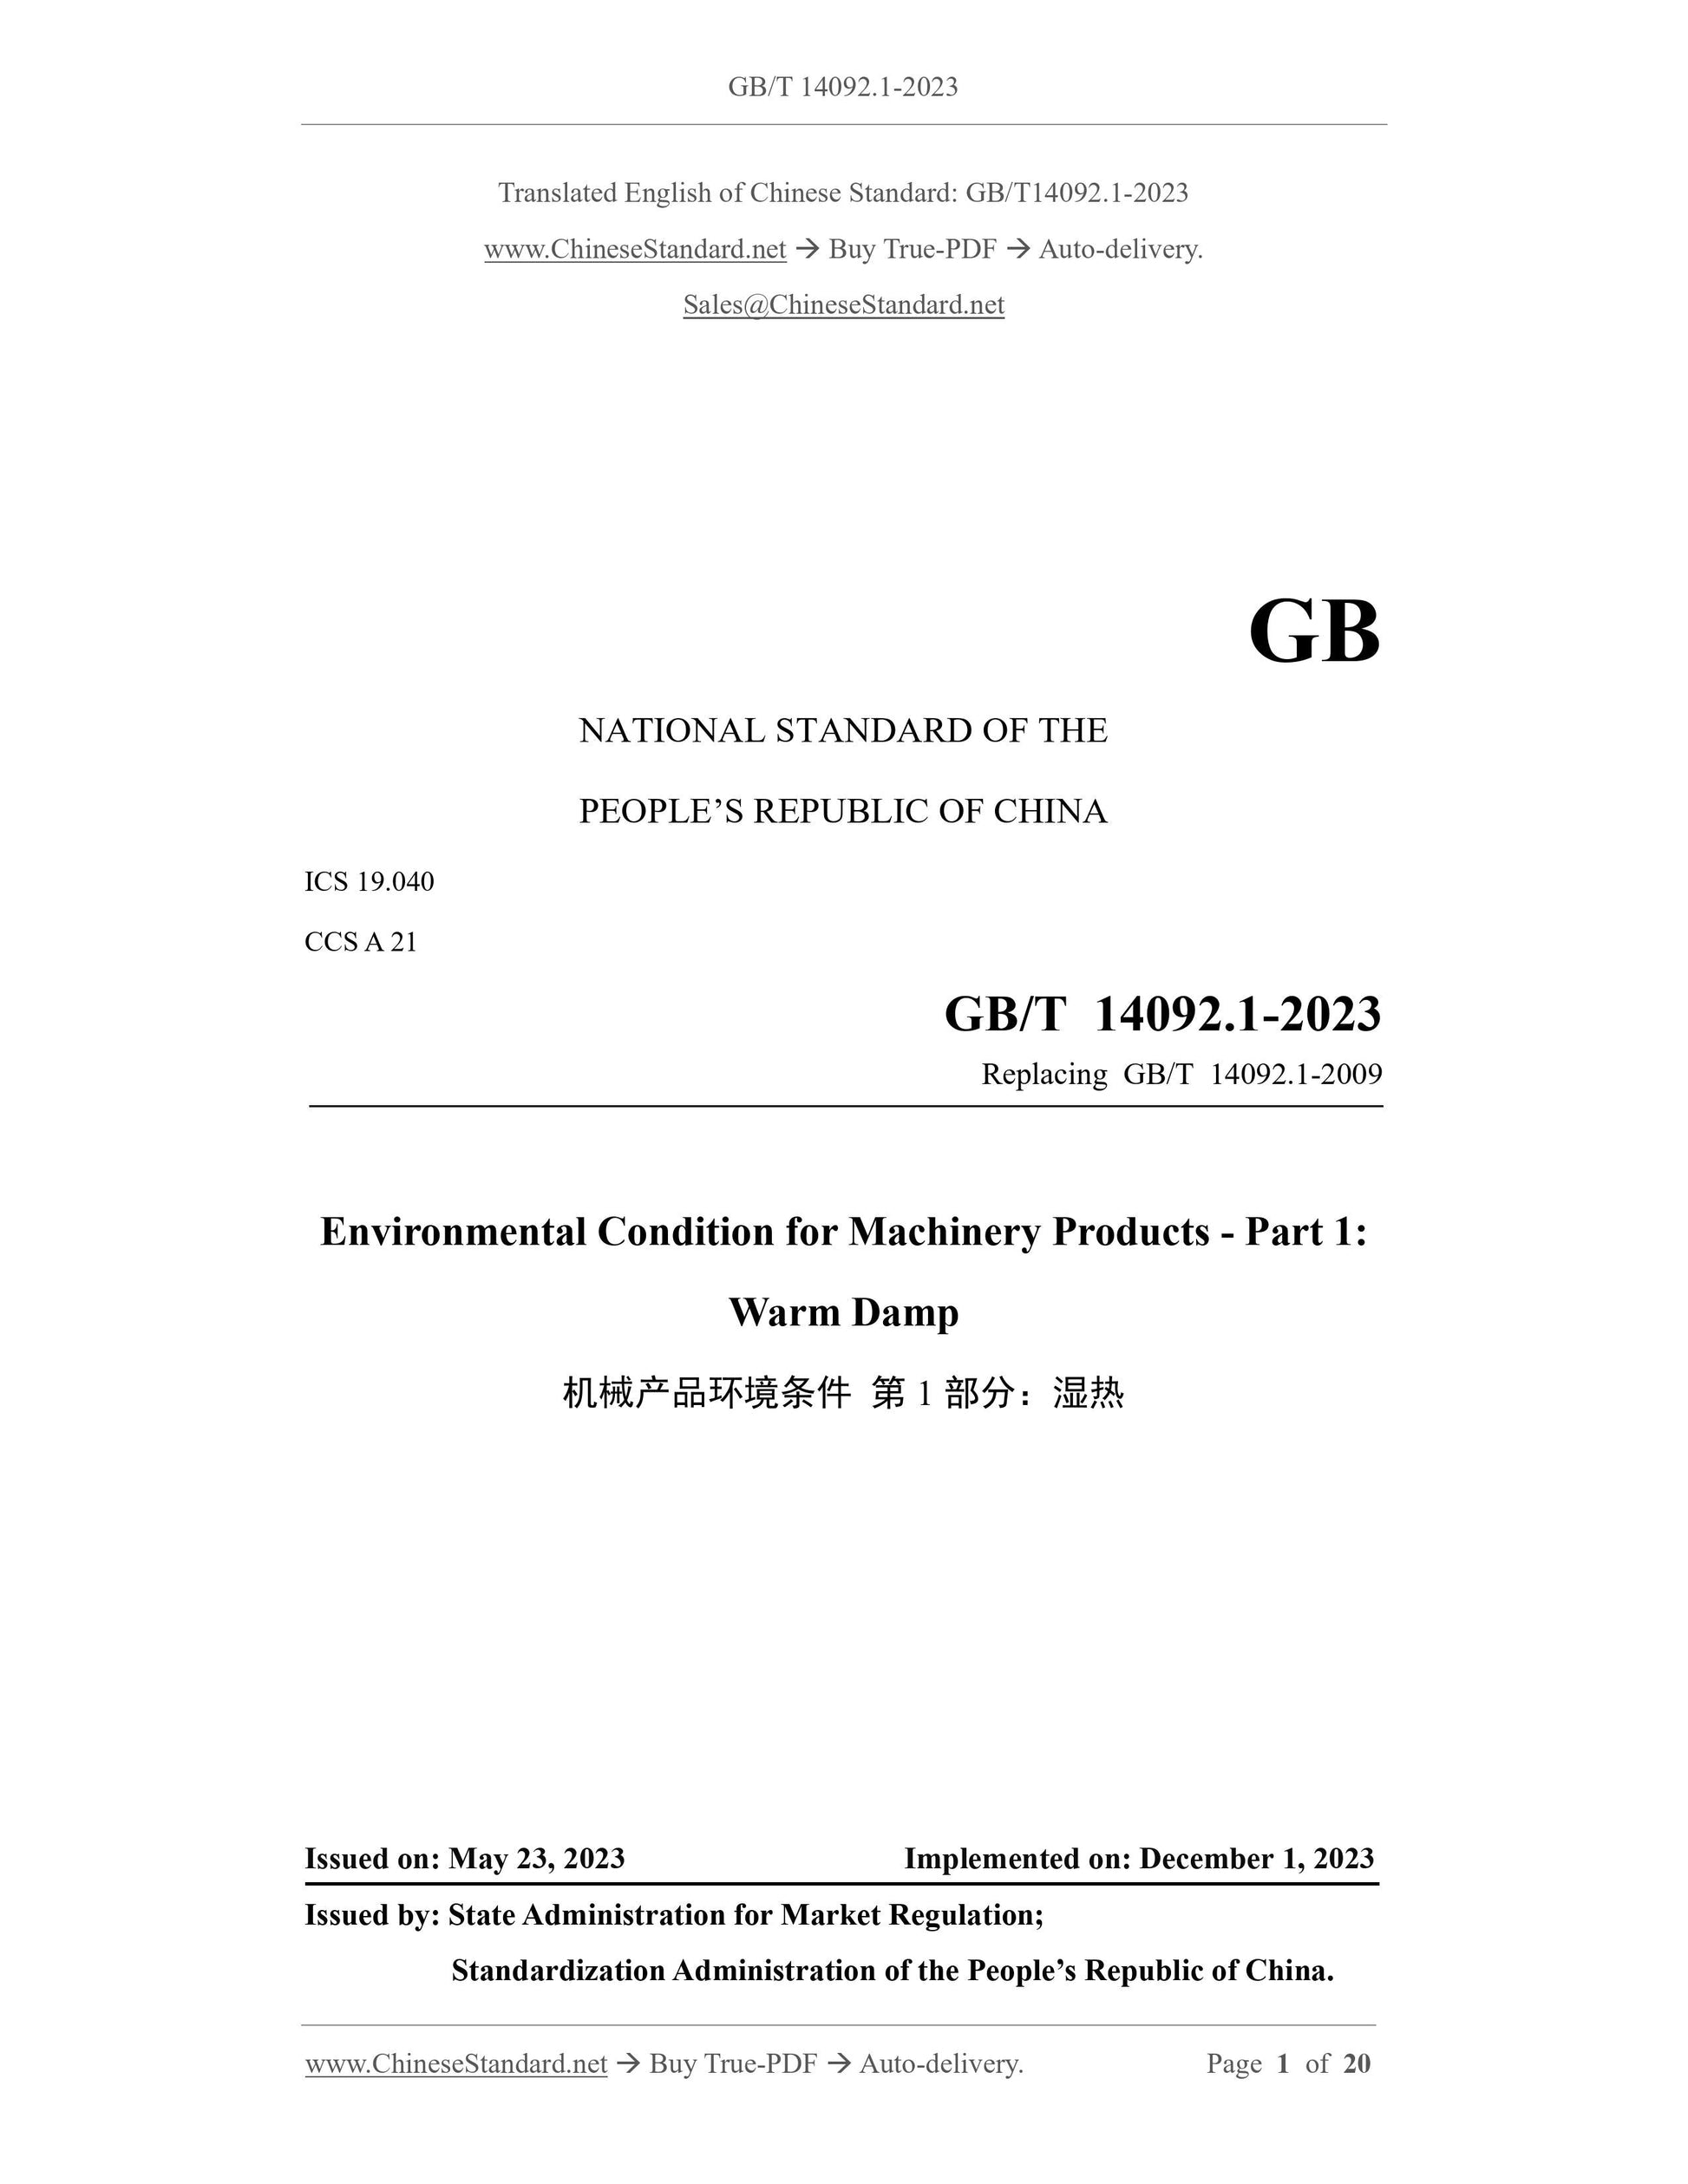 GB/T 14092.1-2023 Page 1